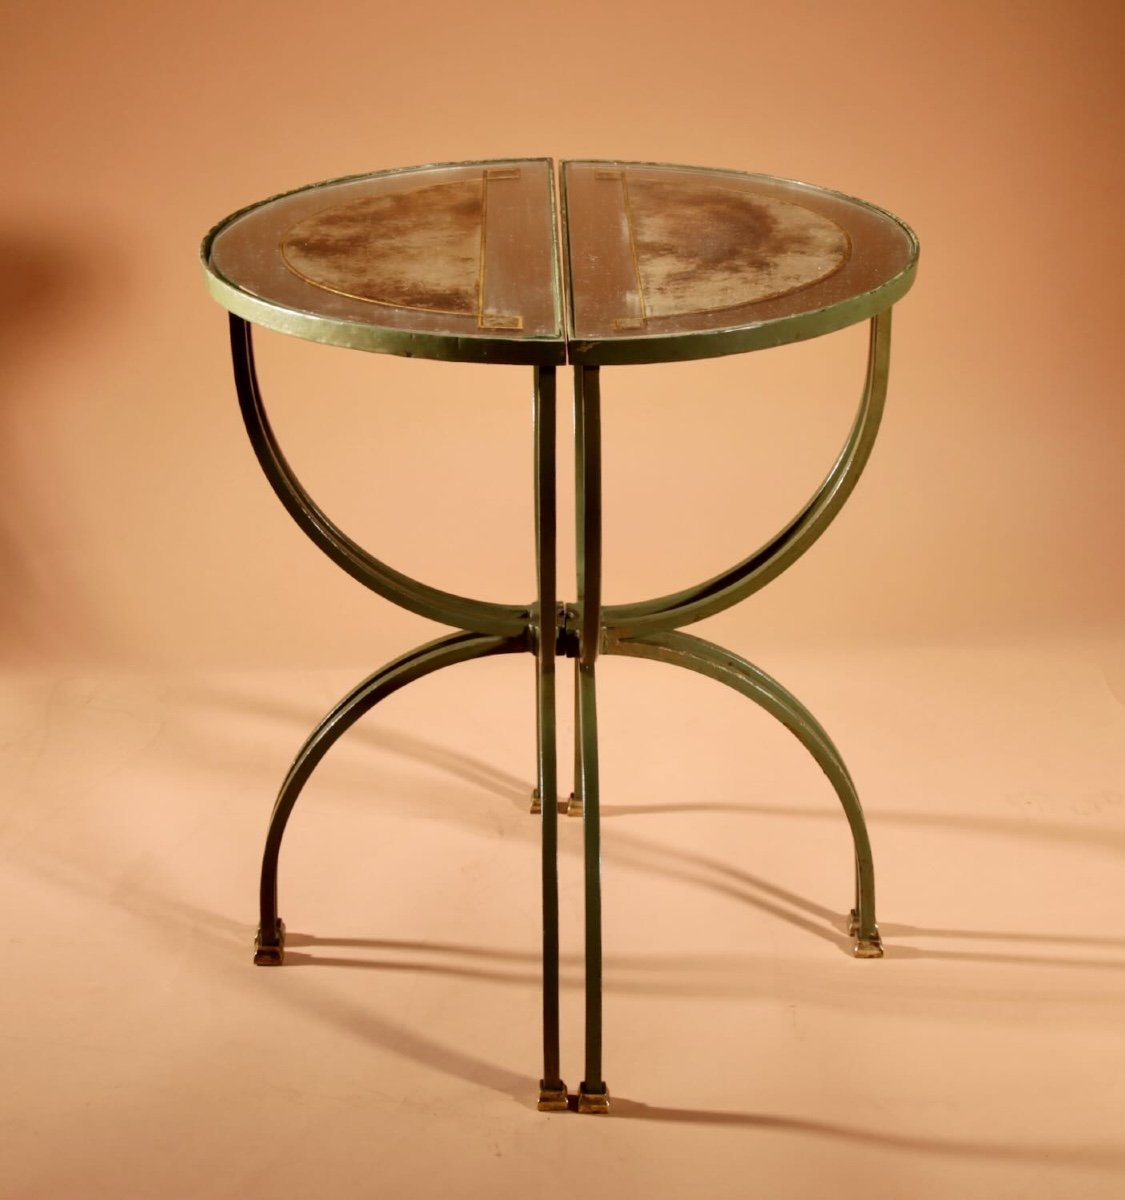 Exceptional Four Parts Art Deco Wrought Iron, Brass And Original Glass French Coffee Table.-photo-7